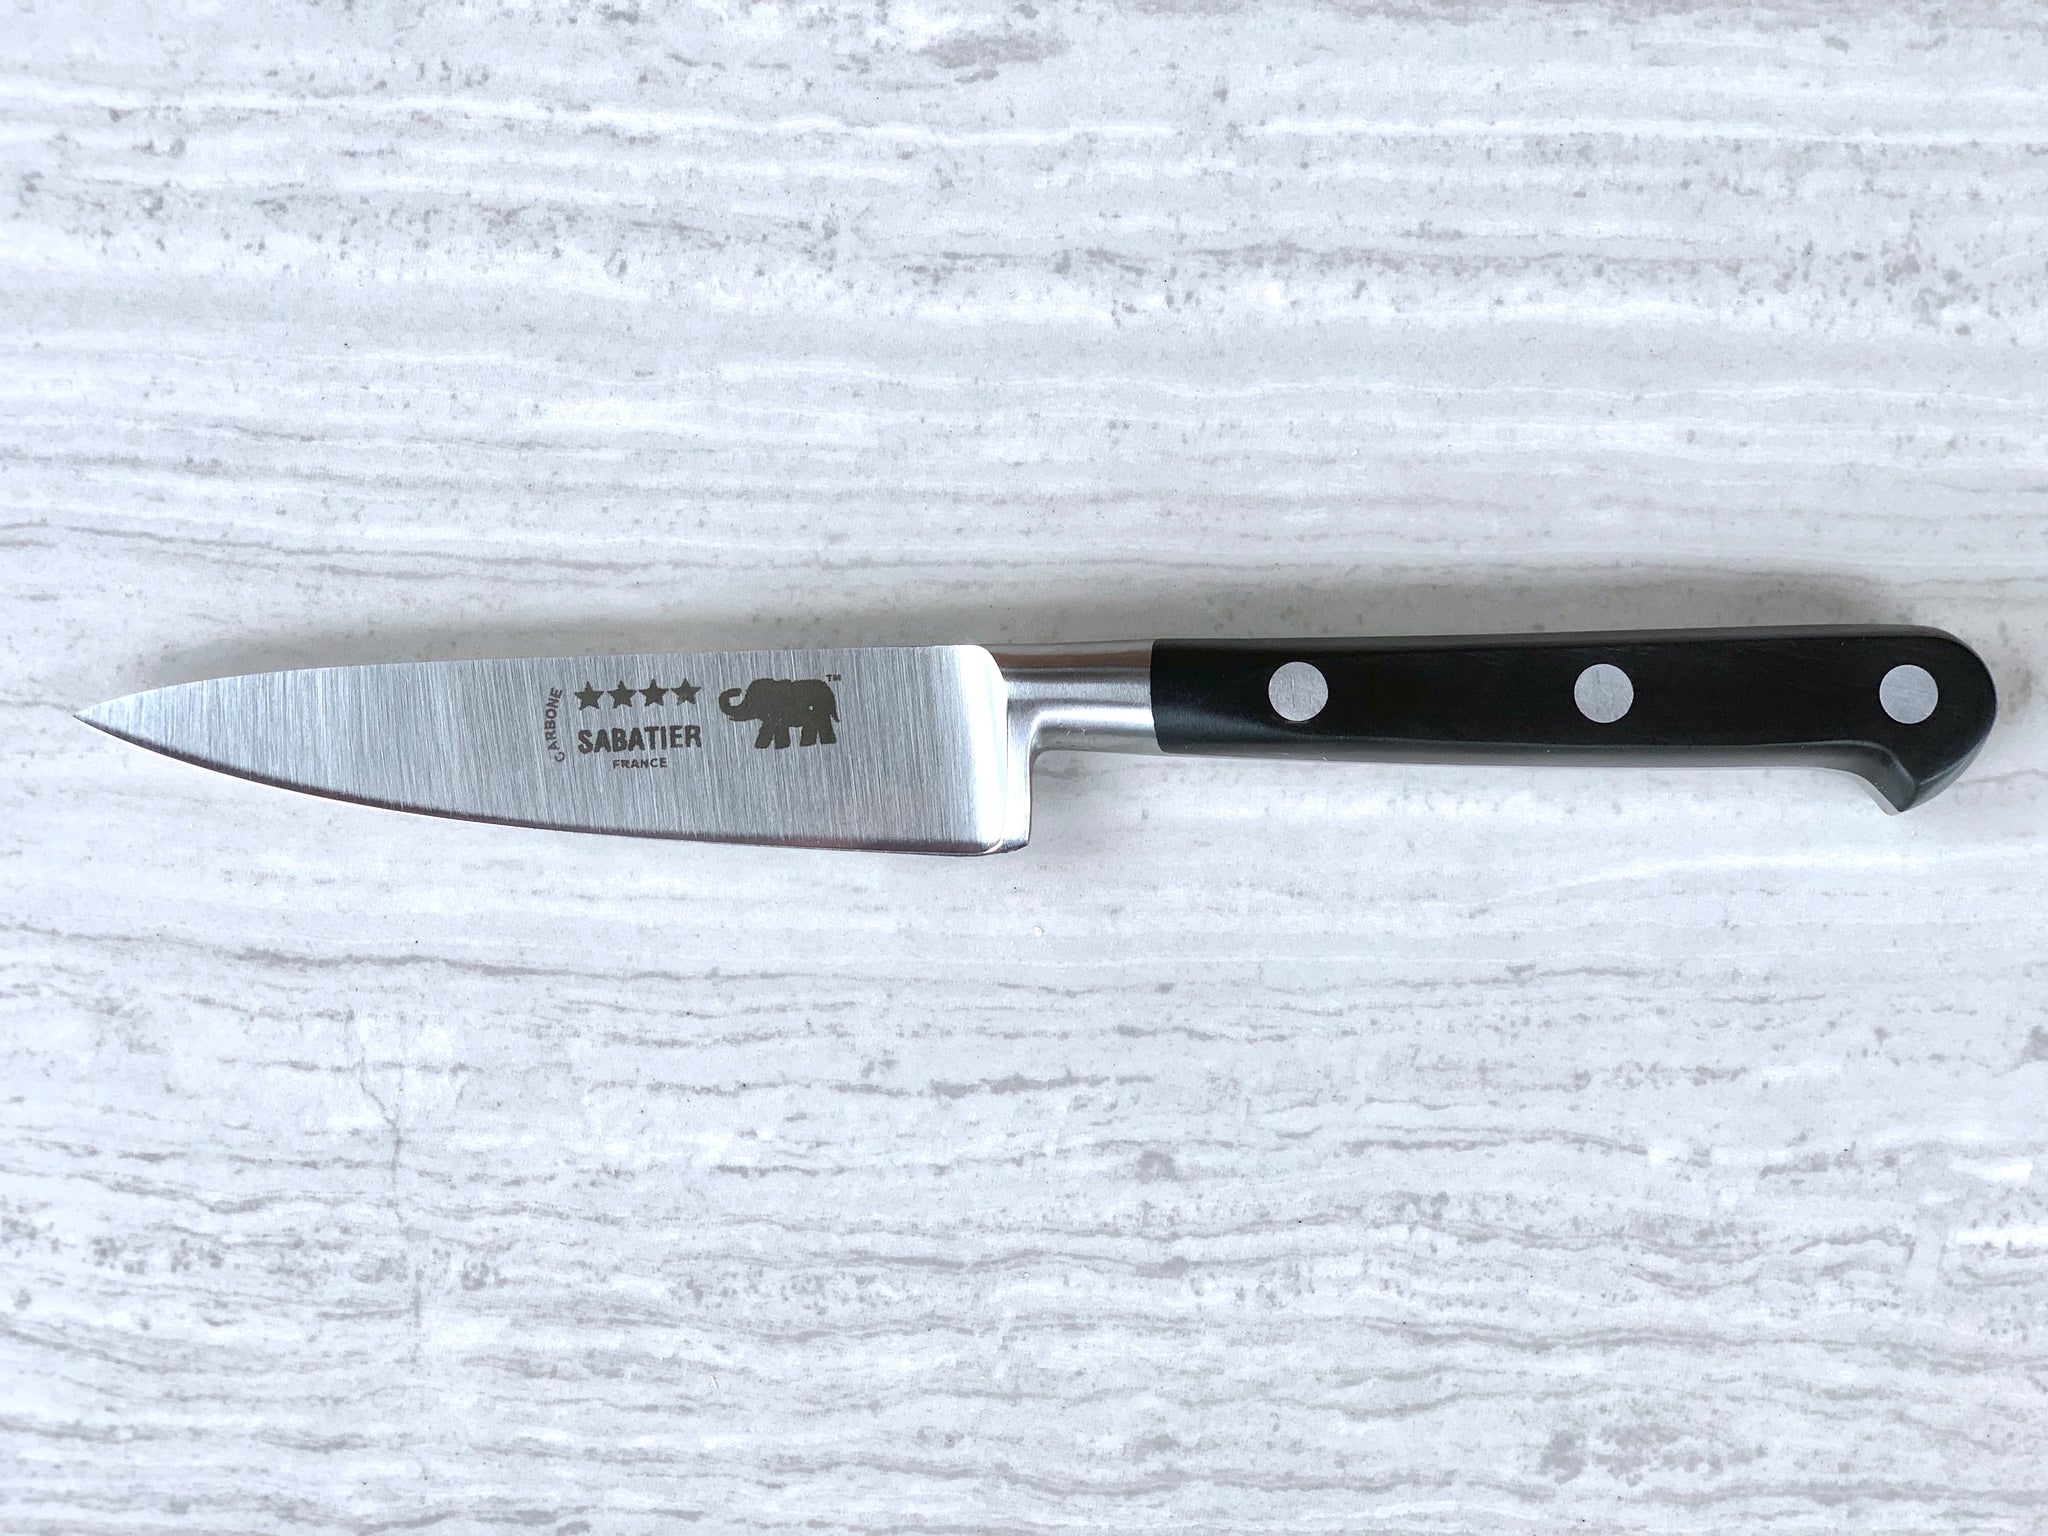 Butcher Knives  4 inch Paring Knife White Handle